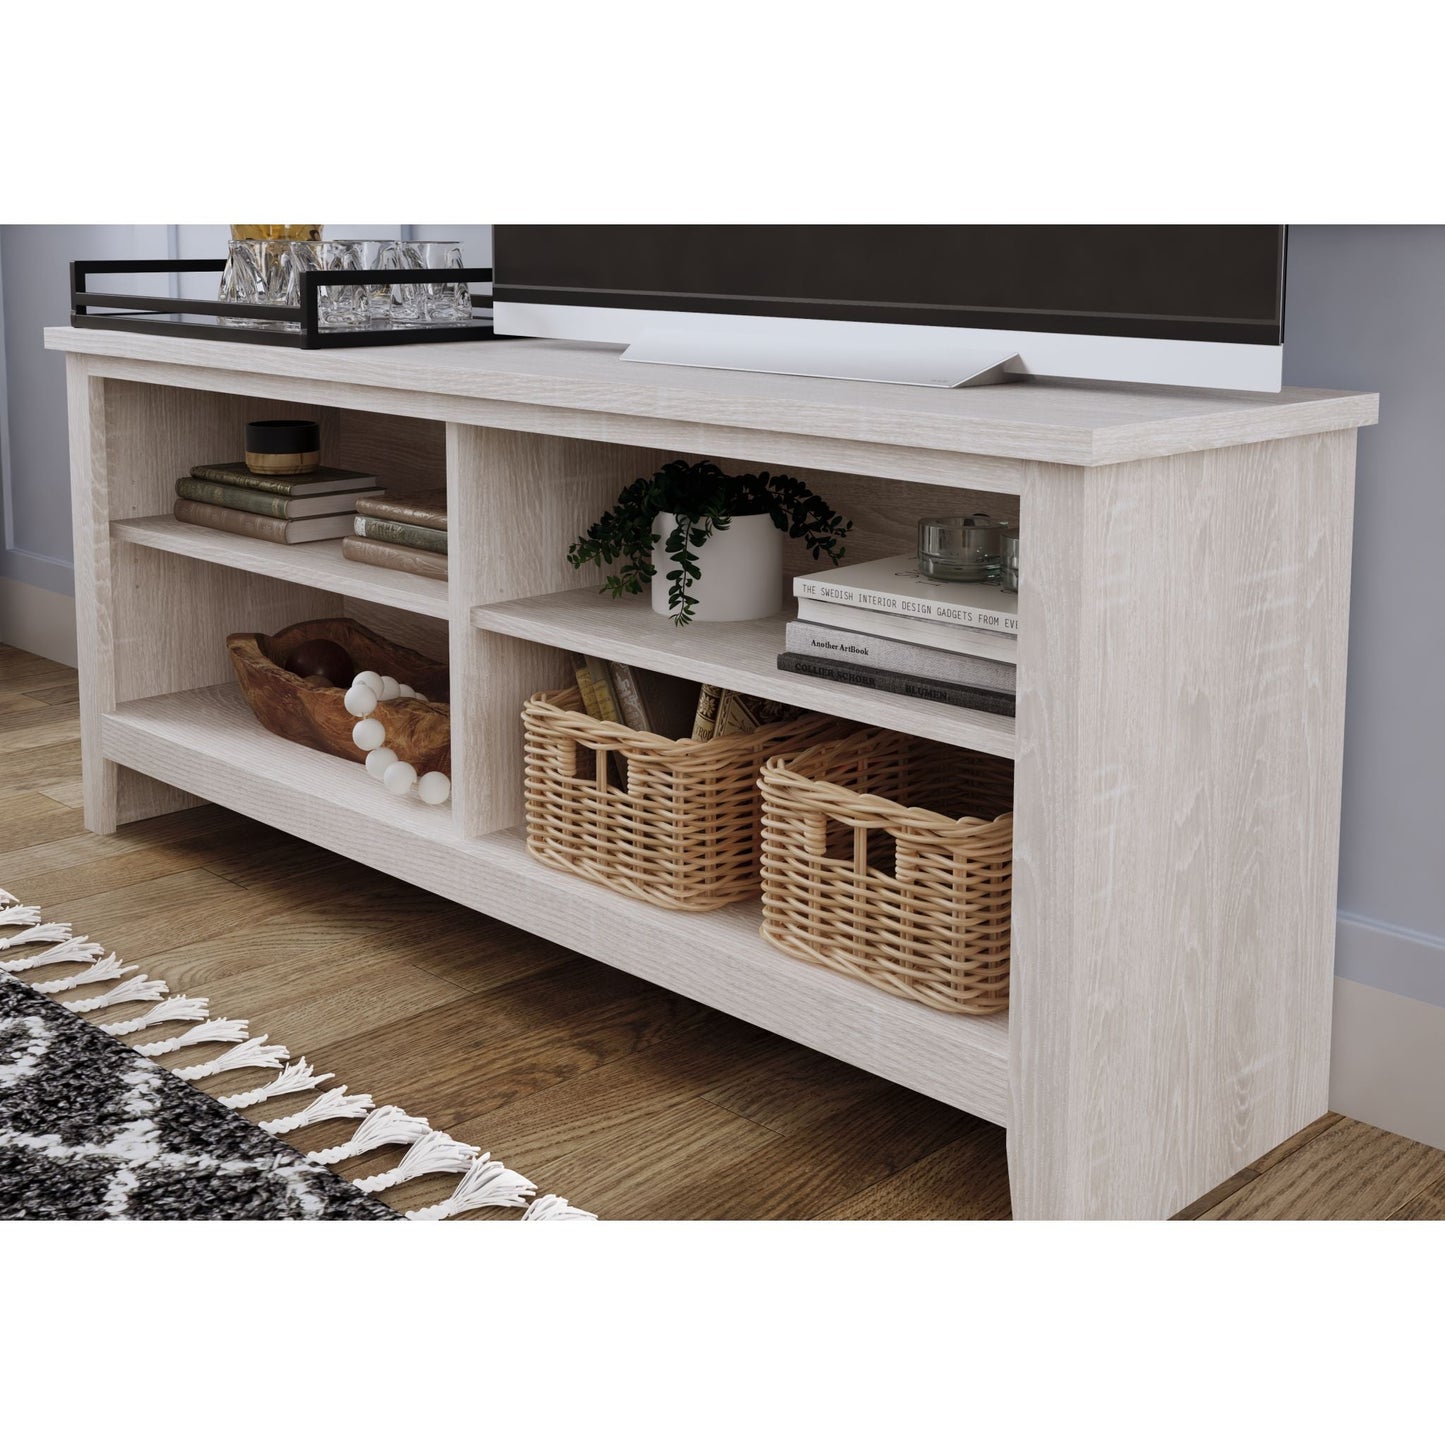 Arlenbry Large TV Stand - Antique White